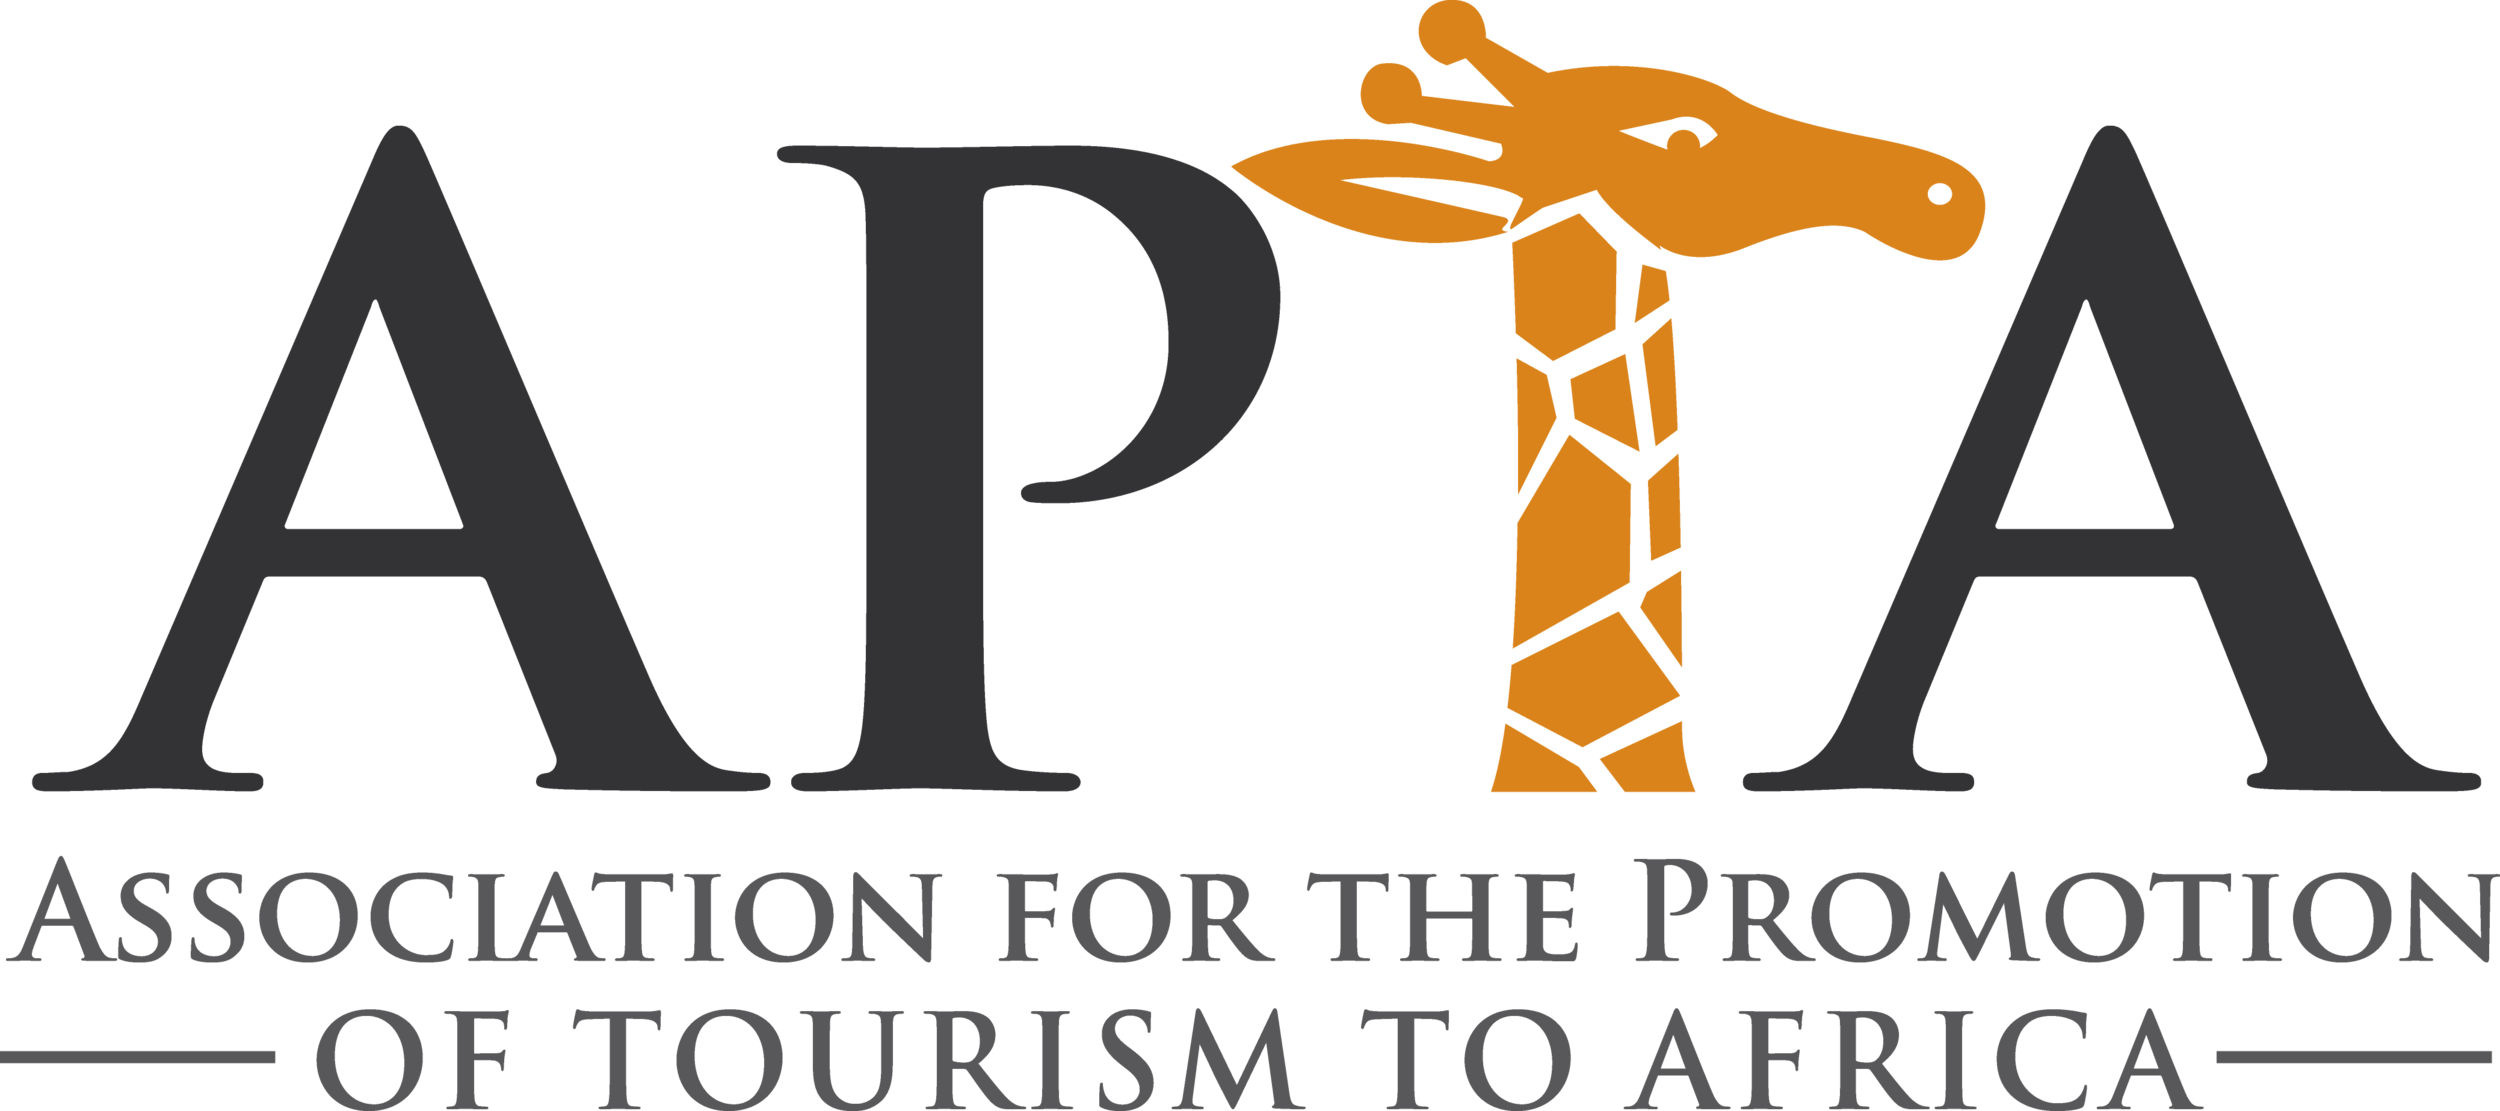 Association for the Promotion of Tourism to Africa member